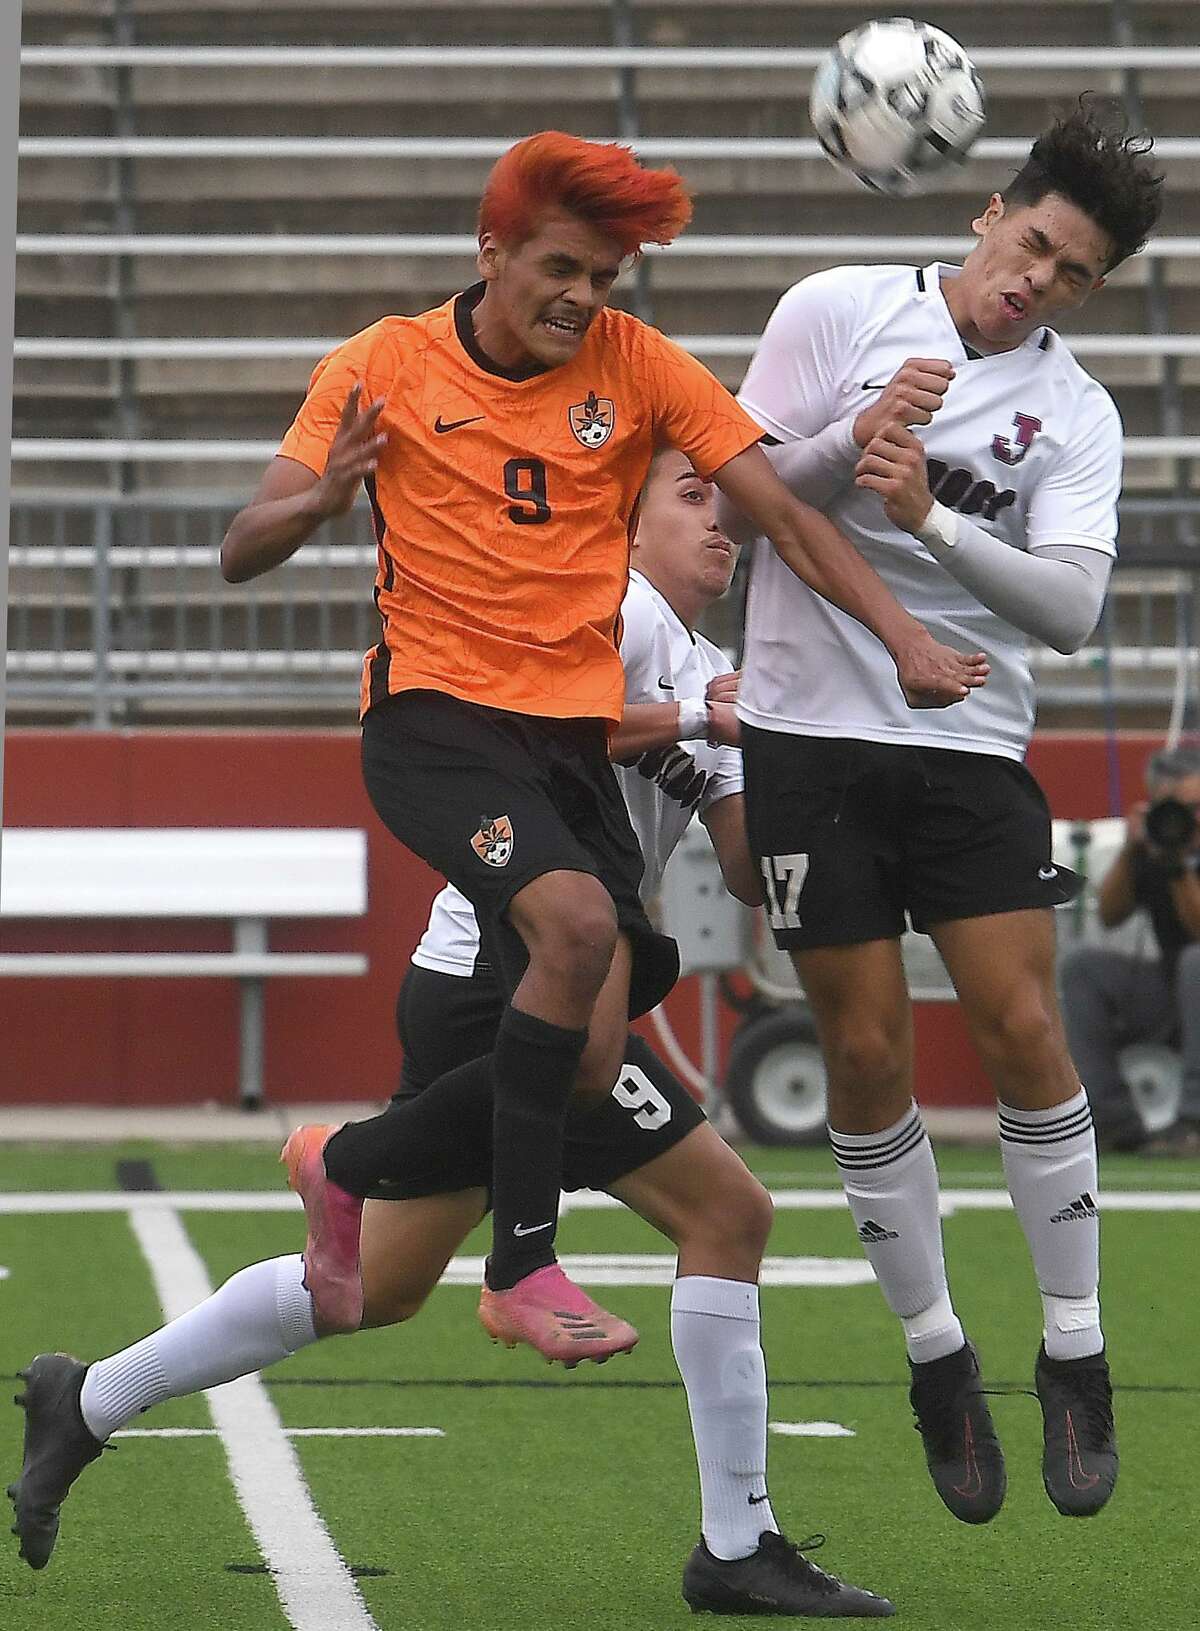 Jasper's Javier Garcia looks to get control of the ball as they battle Scarborough in the area round match-up at Beaumont Memorial Stadium. Photo made Tuesday, March 29, 2022 Kim Brent/The Enterprise